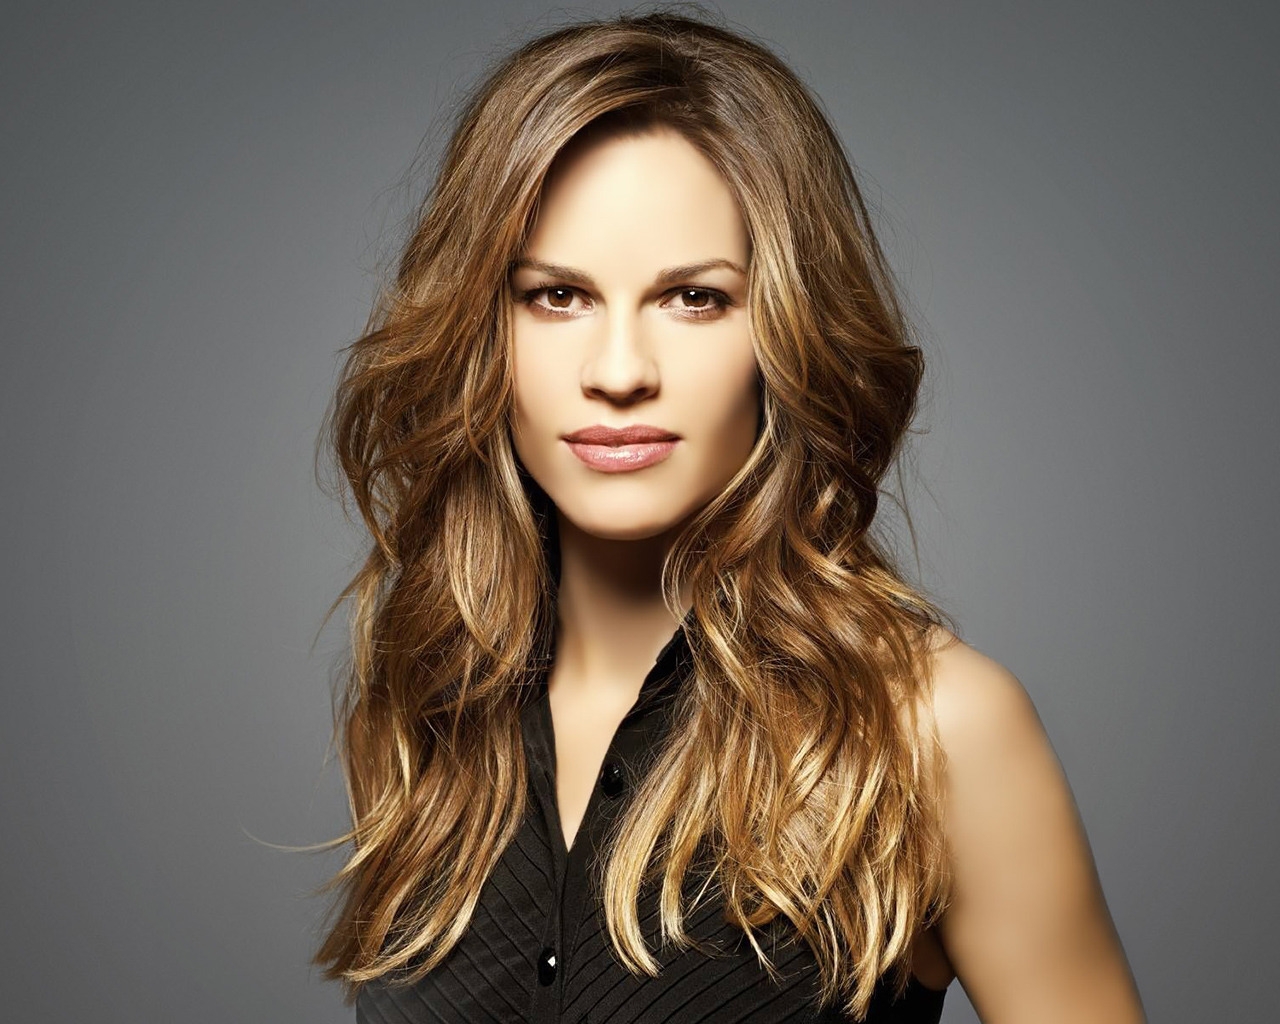 Gorgeous Hilary Swank for 1280 x 1024 resolution